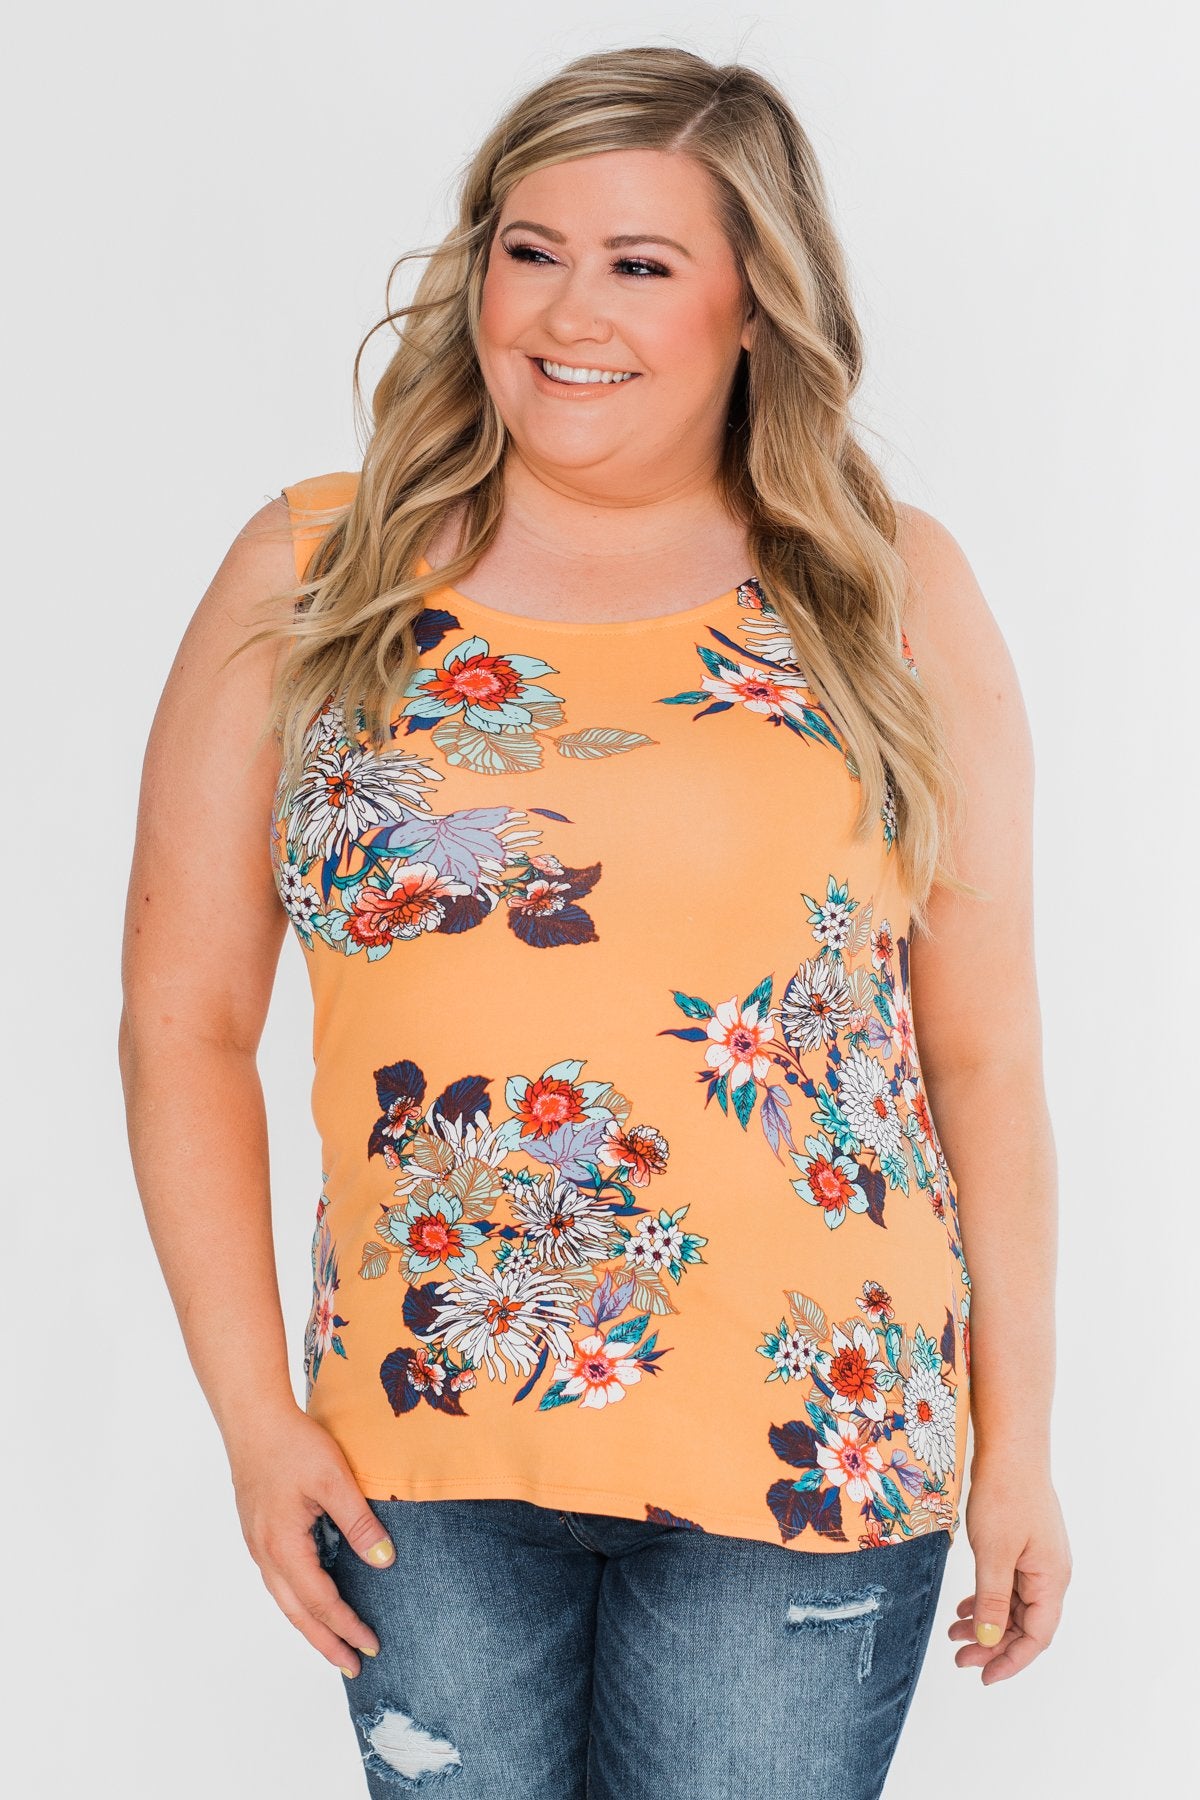 Waiting For You Floral Tank Top- Light Orange